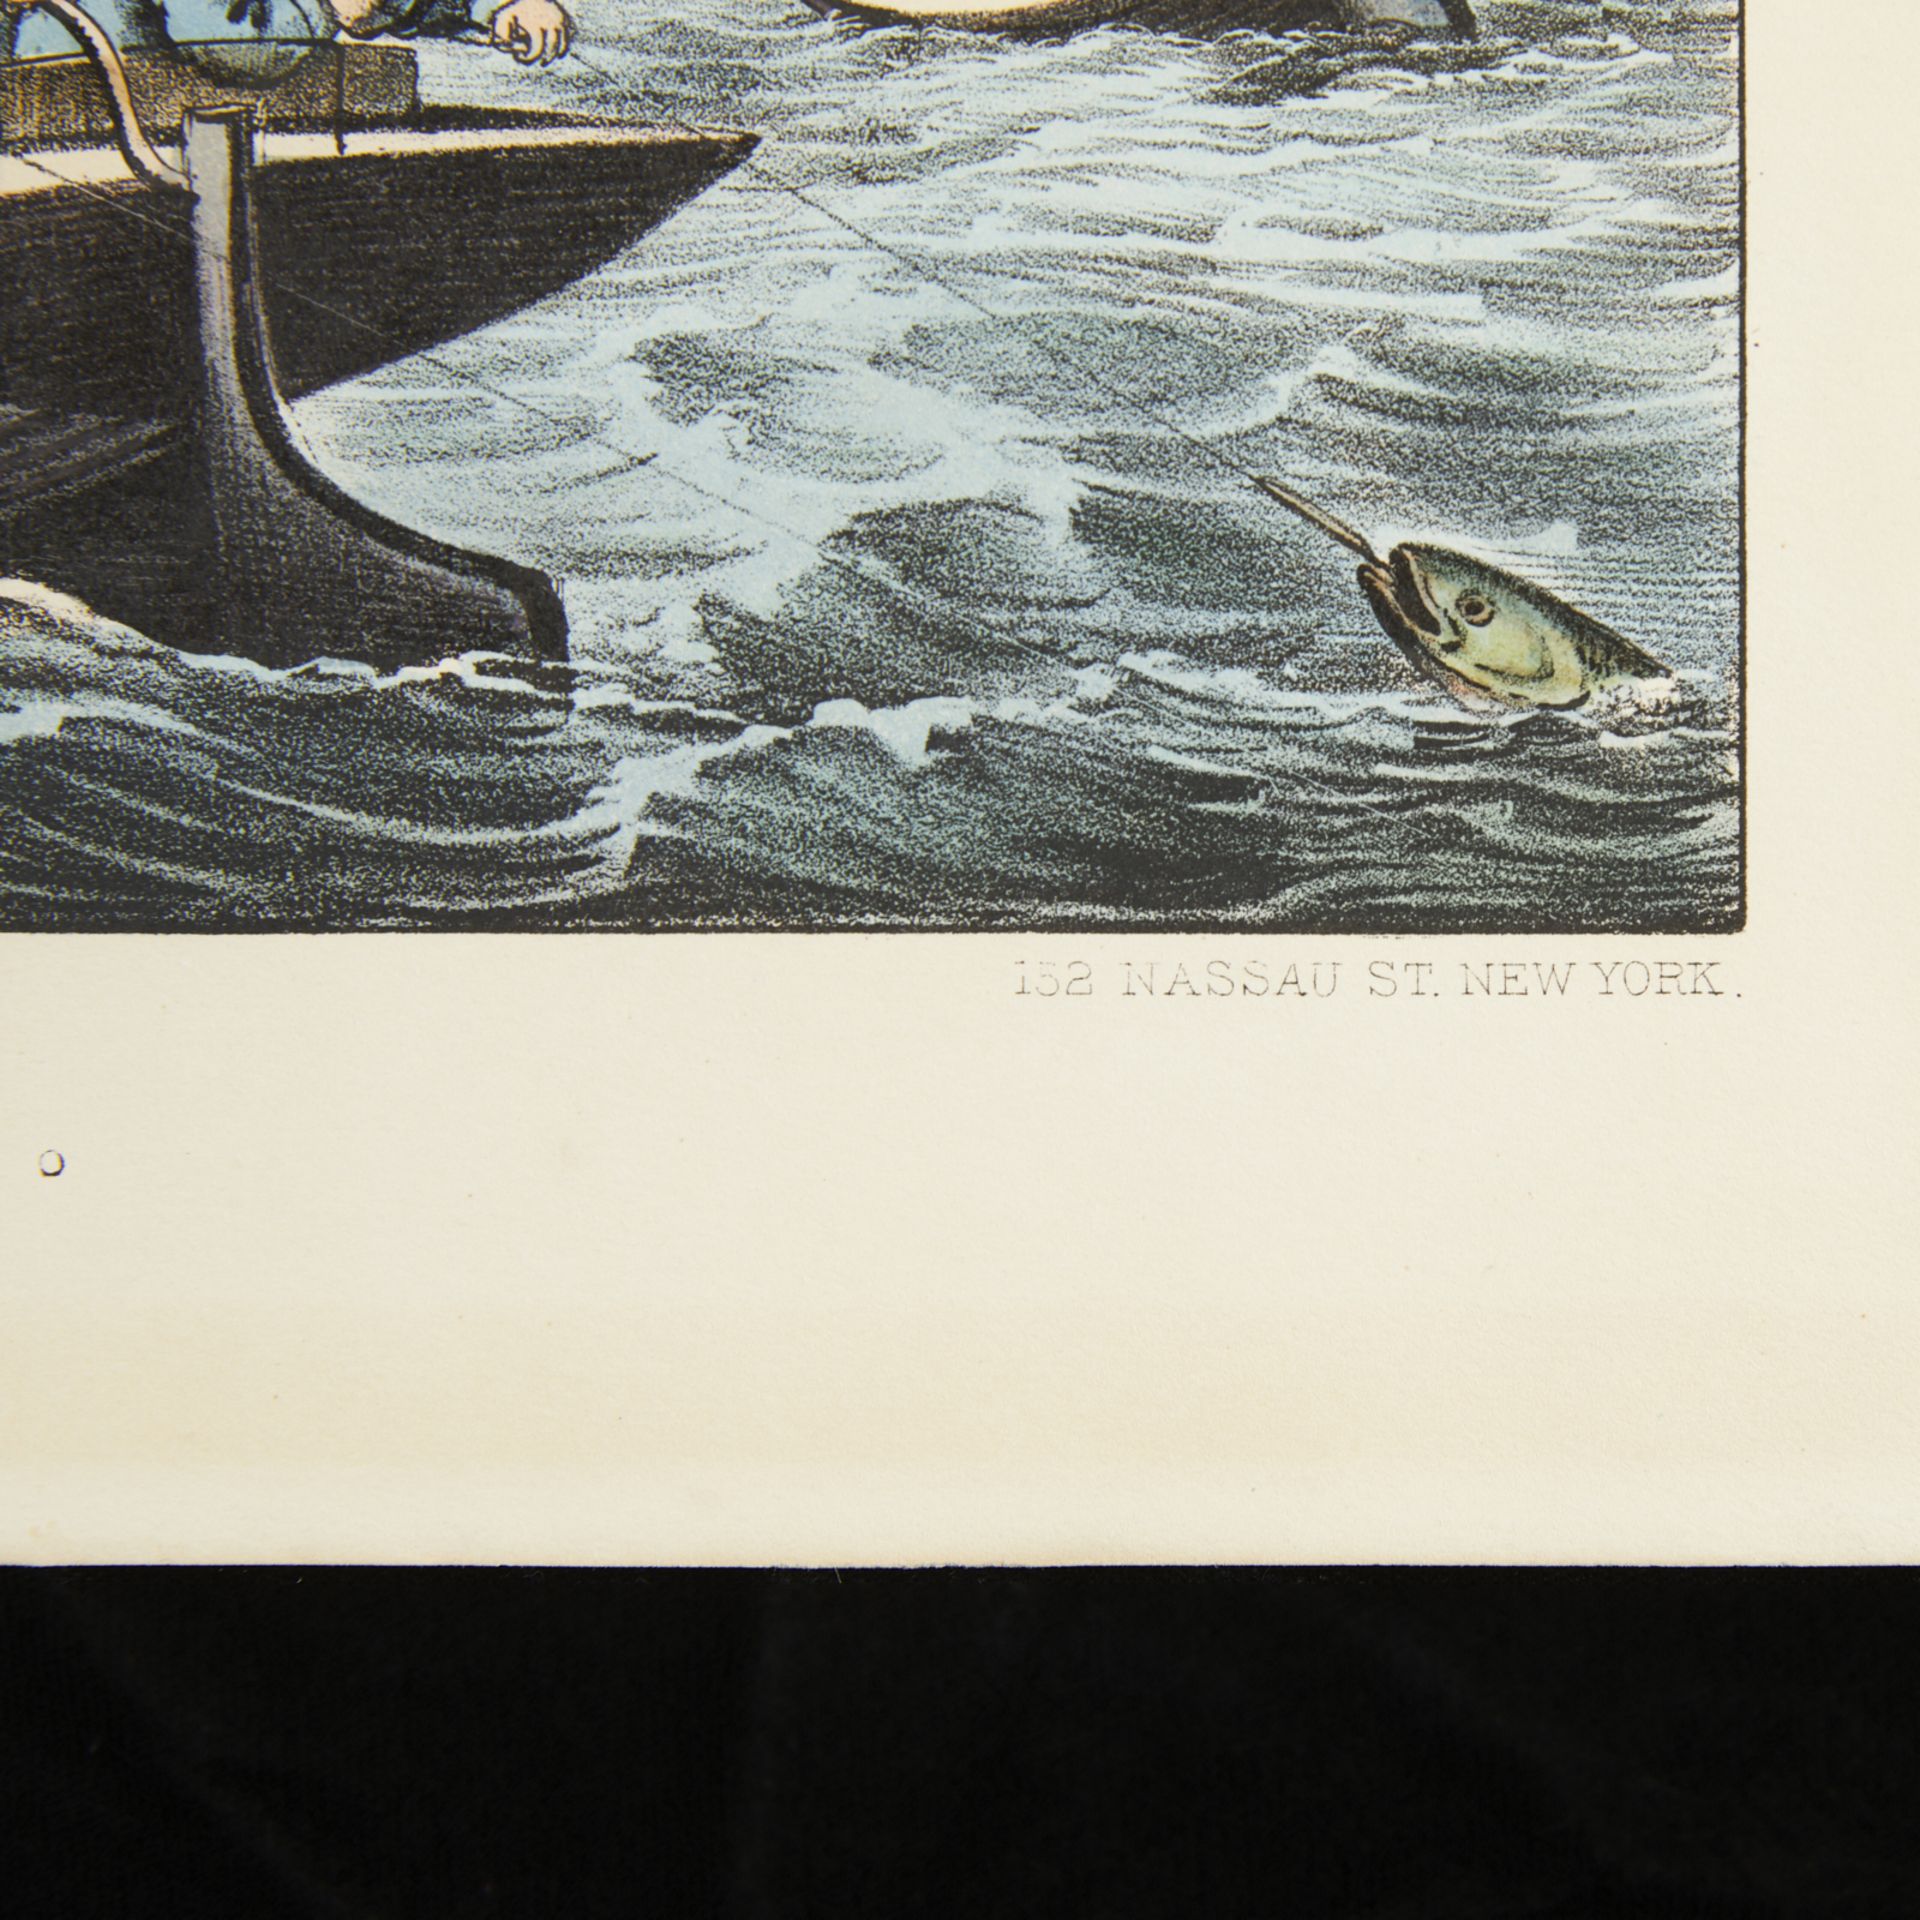 Currier & Ives "Blue Fishing" Print - Image 5 of 8